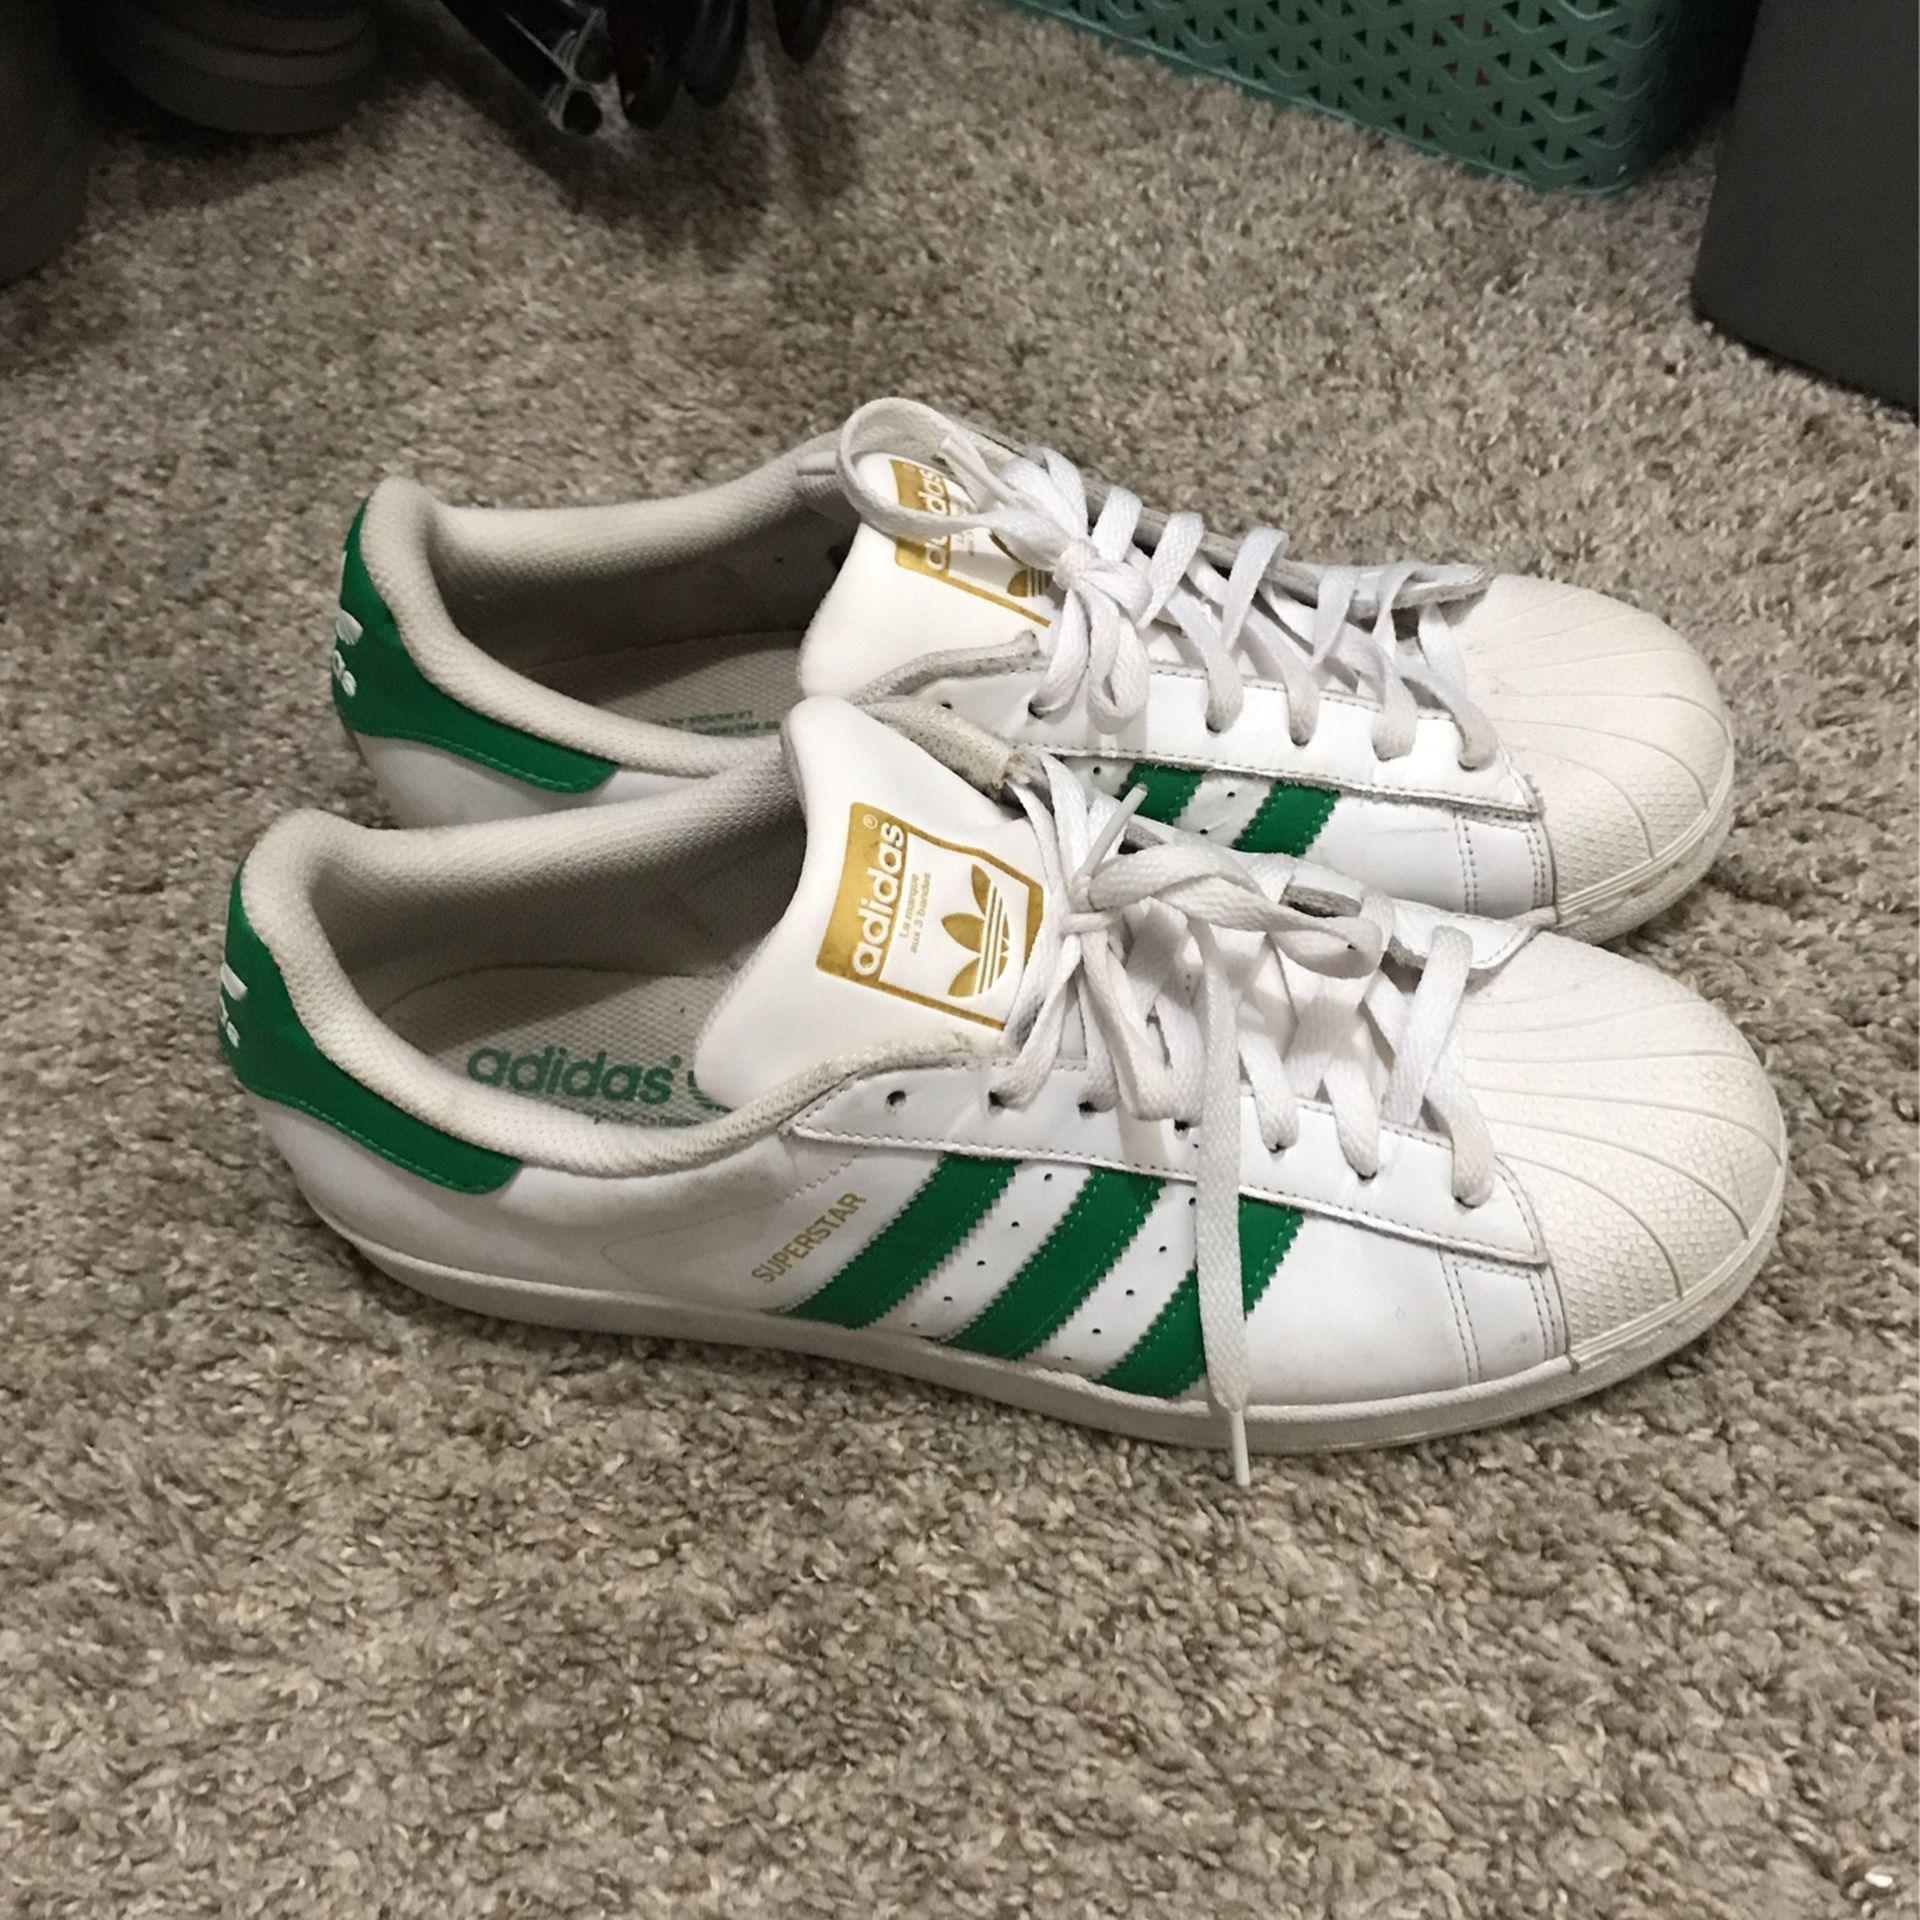 Mens Size 10 Adidas White With Green Stripes